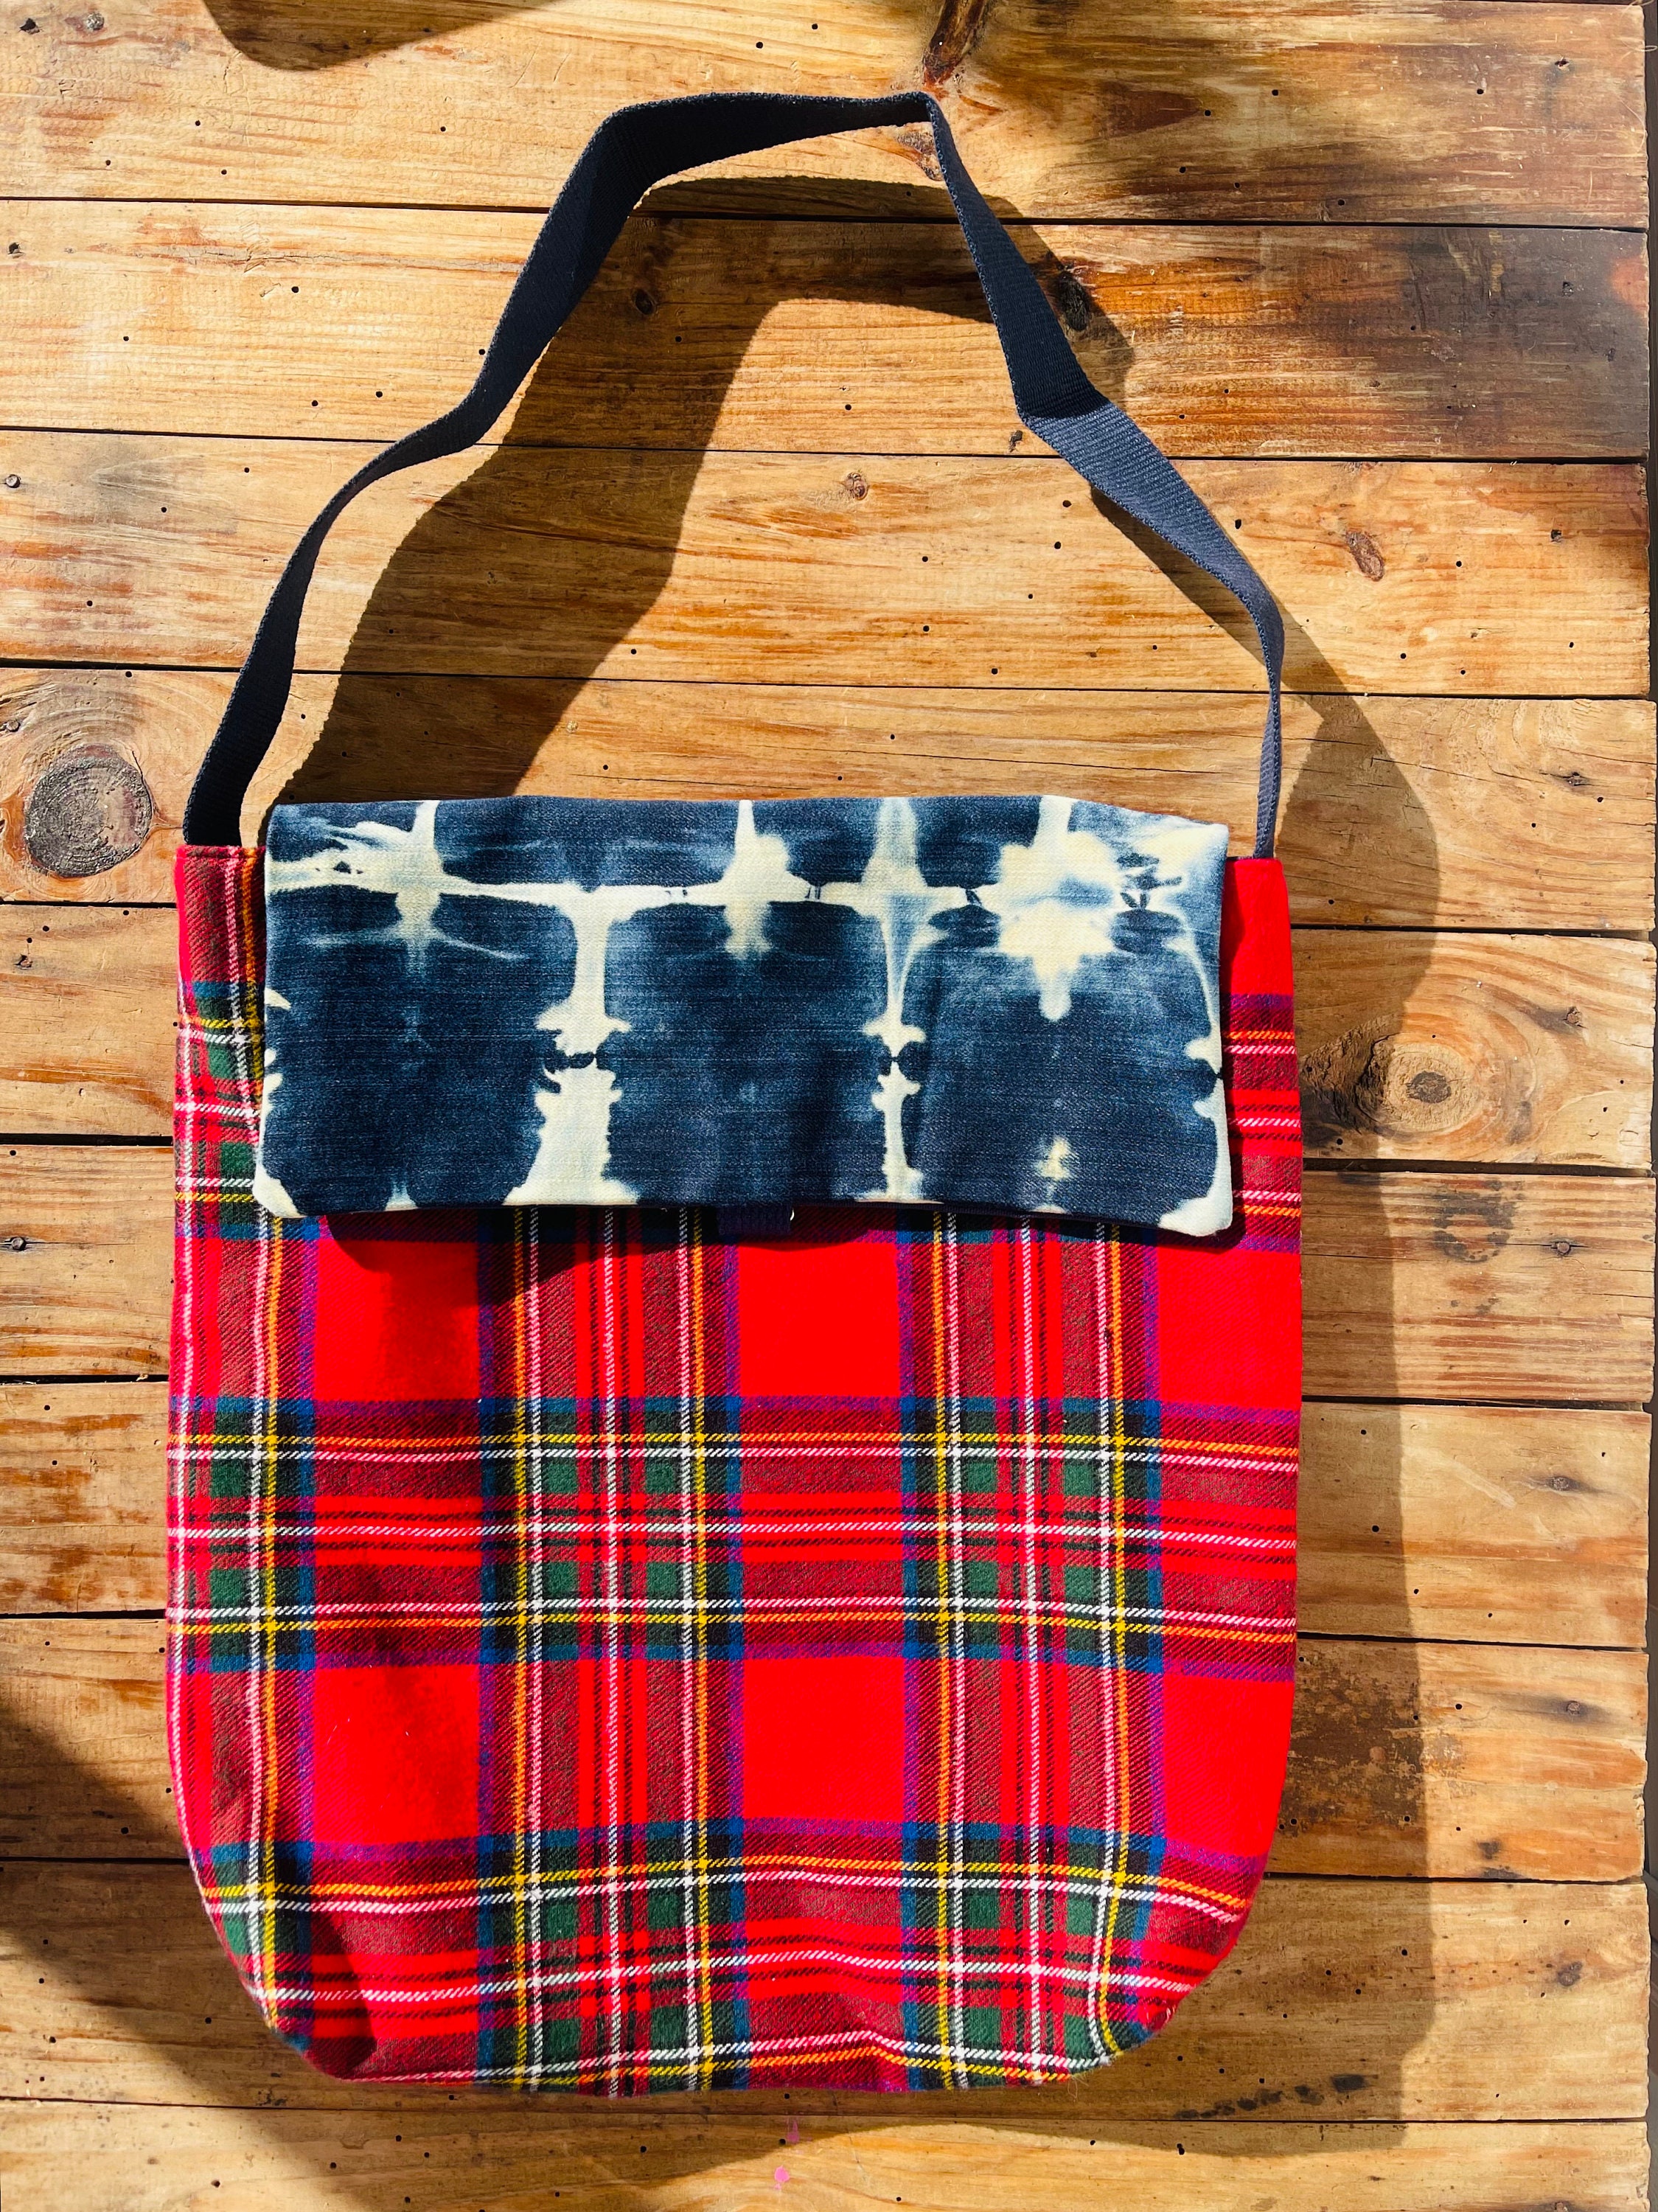 Flannel Tartan Plaid and Tie Dyed Tote With Flap Latch Closure. Lined ...